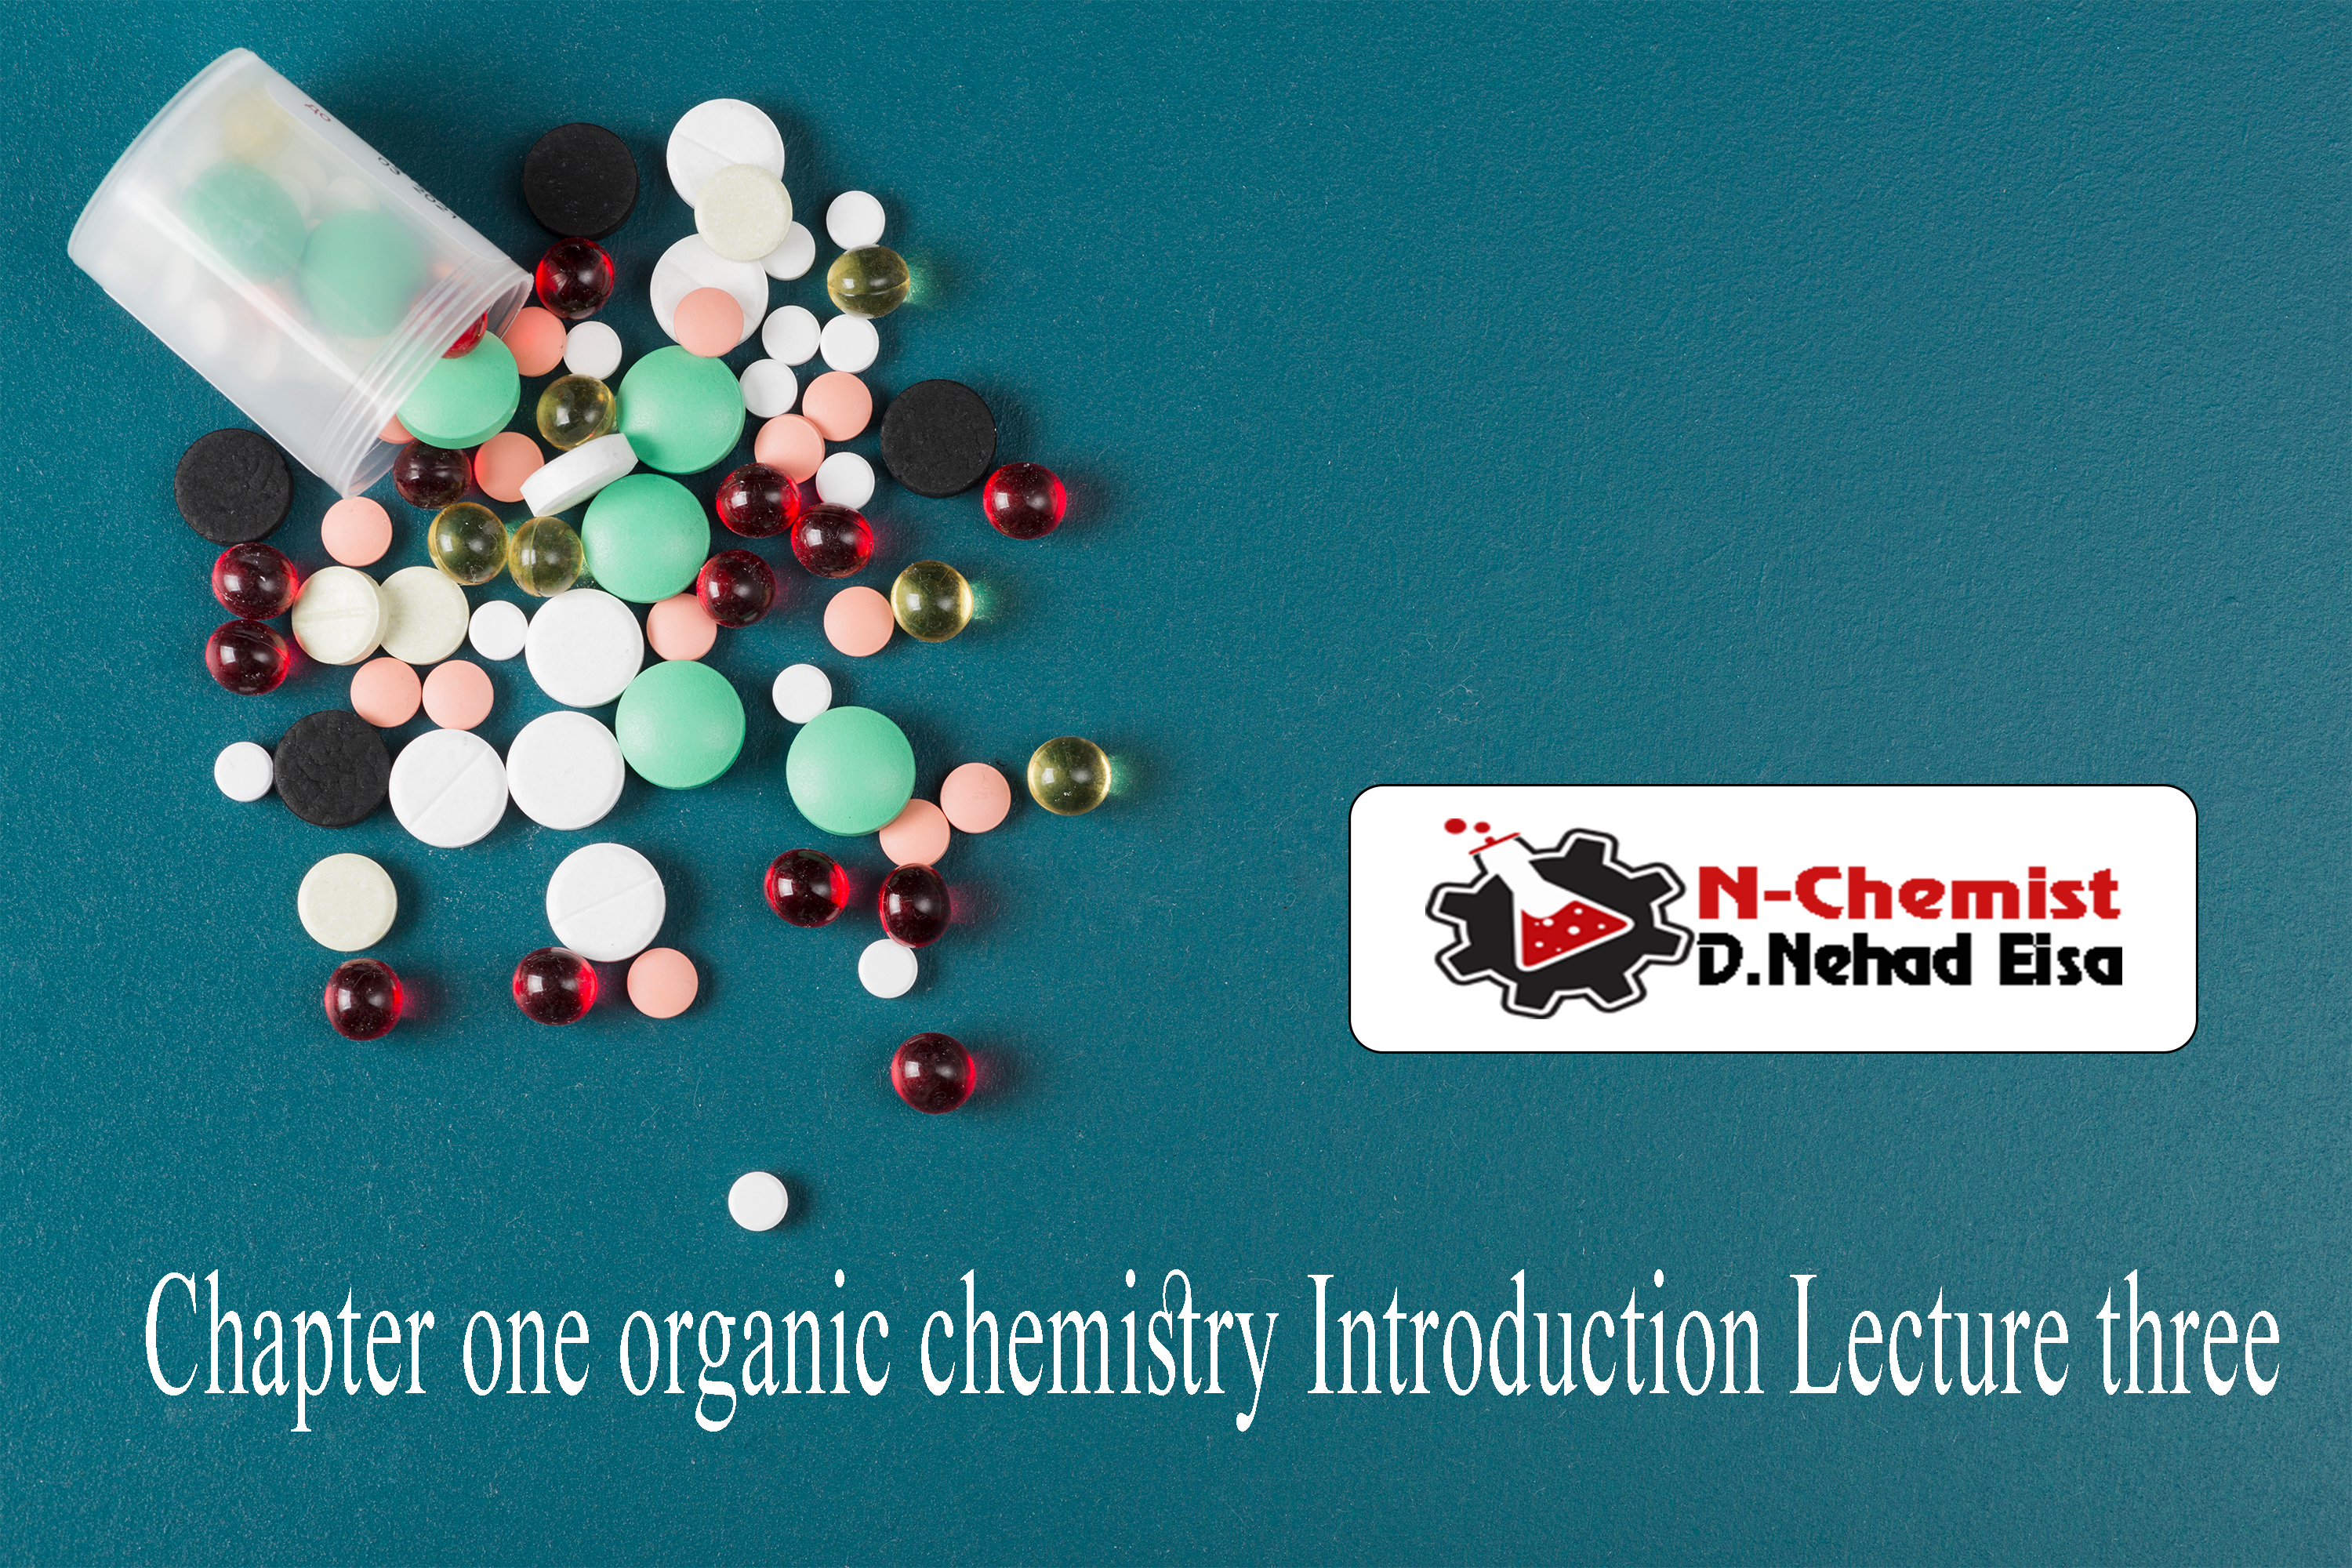 Chapter one organic chemistry Introduction Lecture three